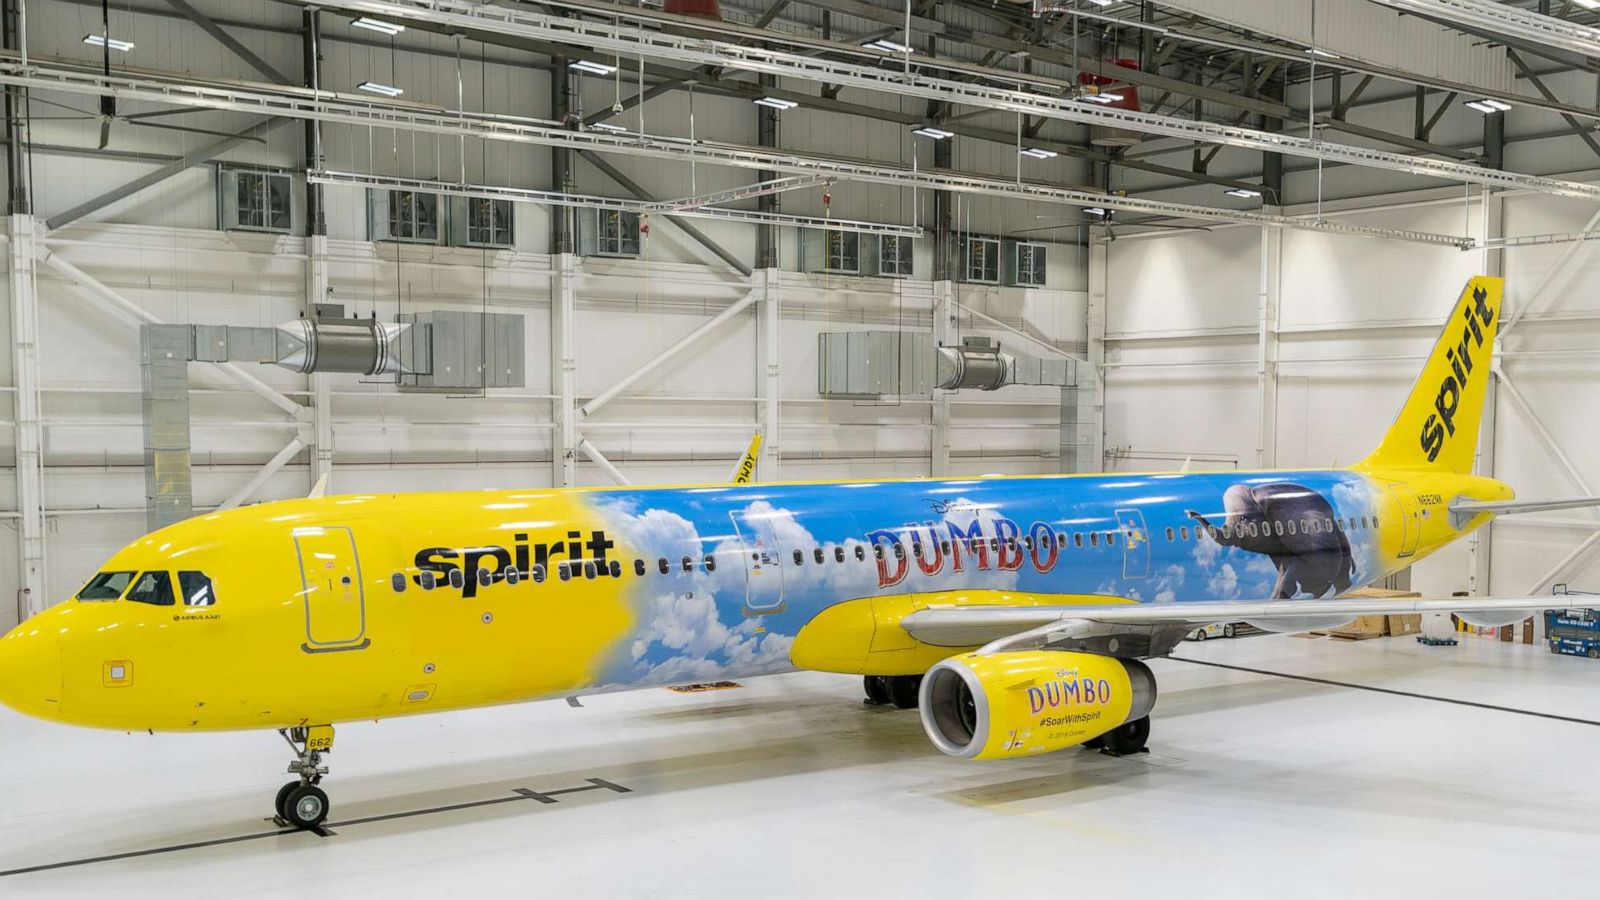 PHOTO: Spirit Airlines A321 aircraft featuring livery celebrating Disney's "Dumbo" movie release is shown.